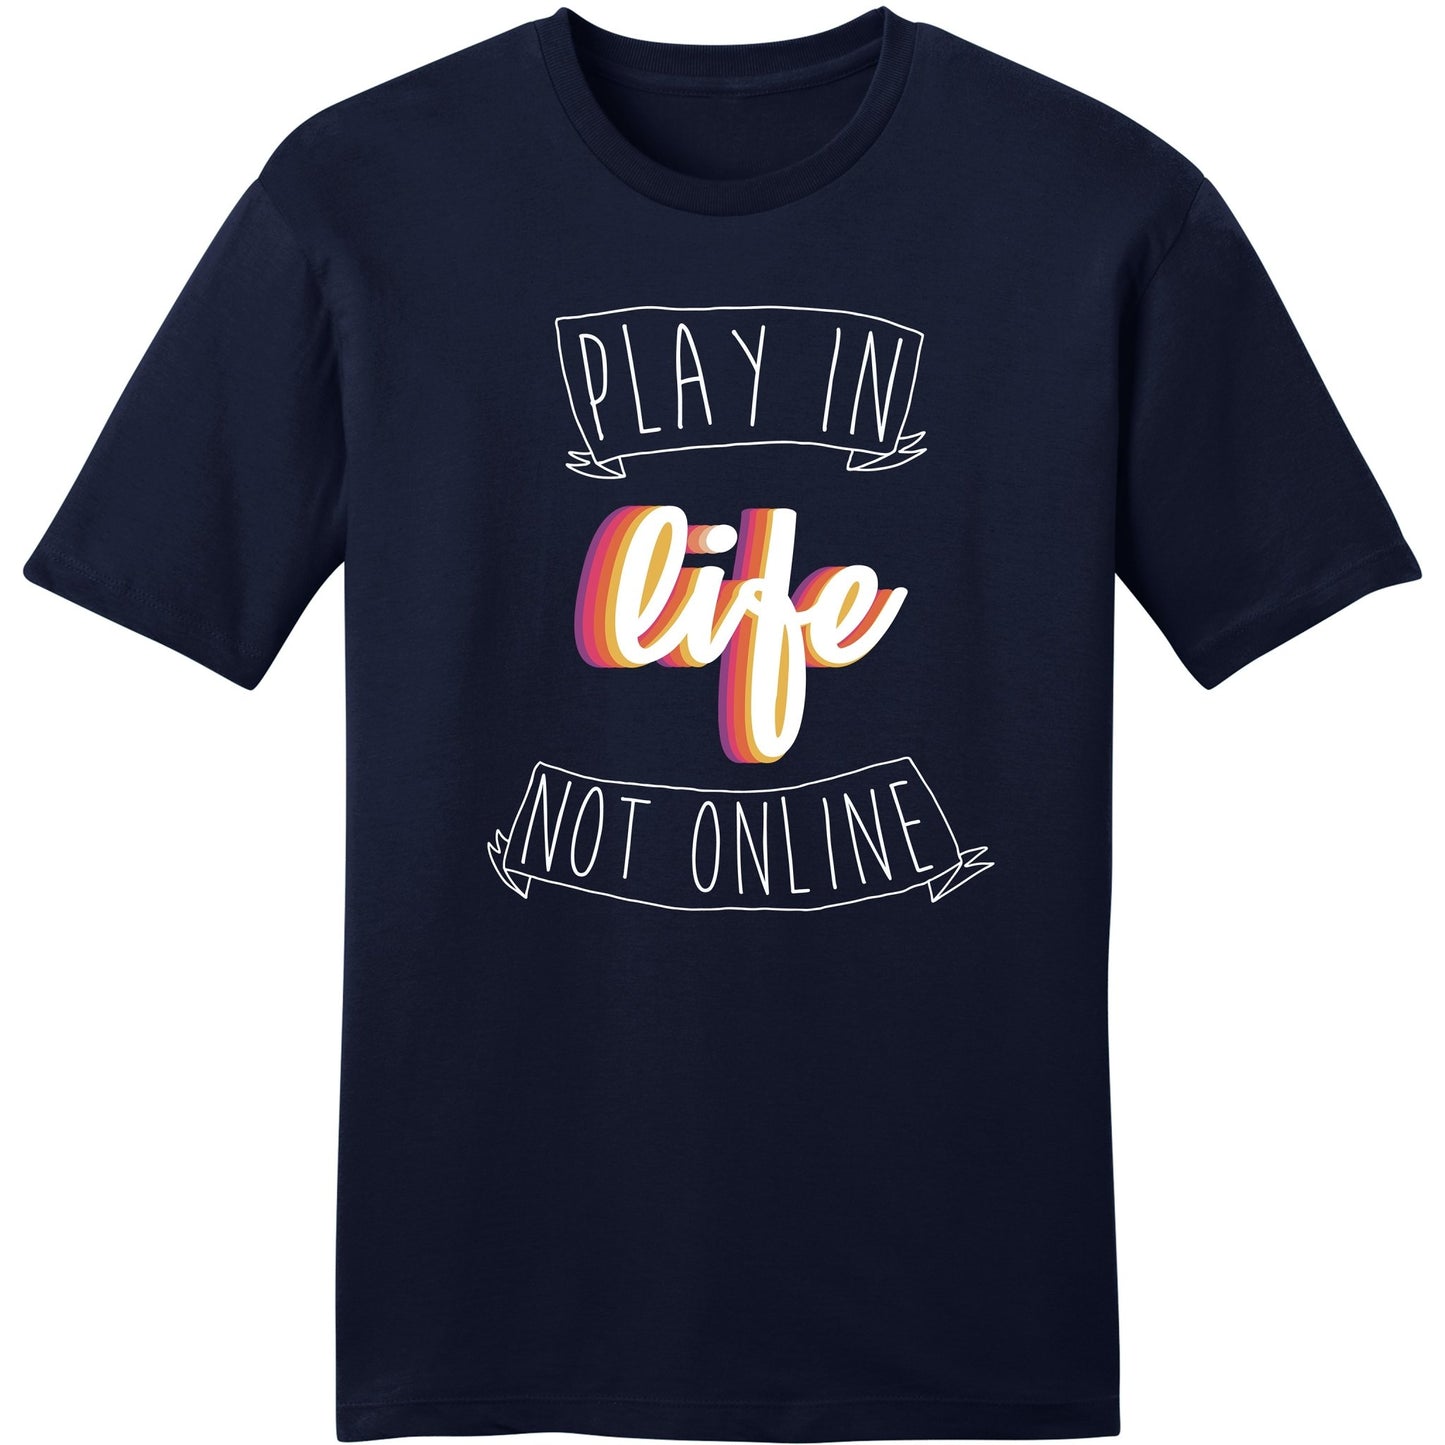 Play in life , not online - Thumb United